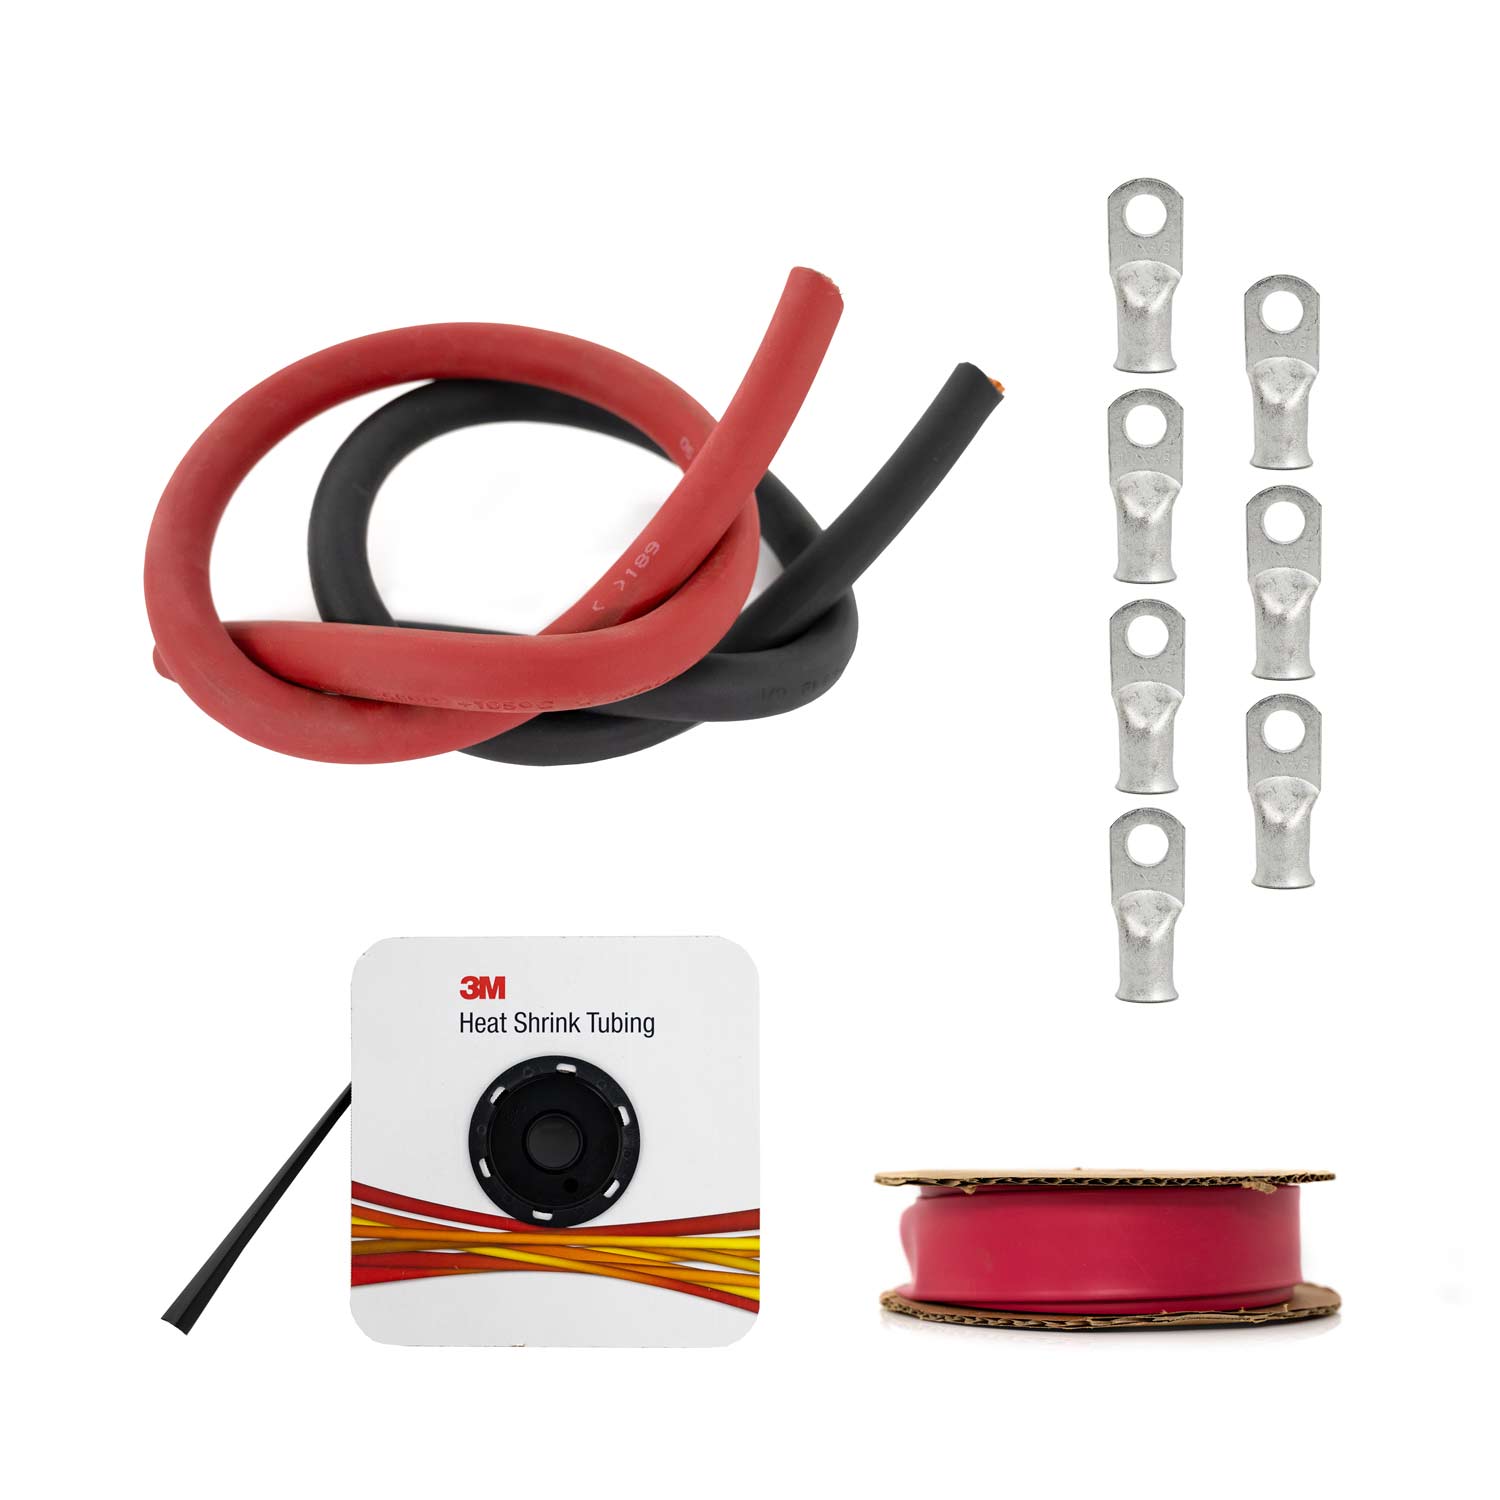 Two Pre-cut Black and Red Cable, One Pre-cut Red Shrink Tubing, One Pre-cut Black Shrink Tubing, Seven 3/8" Ring Lugs